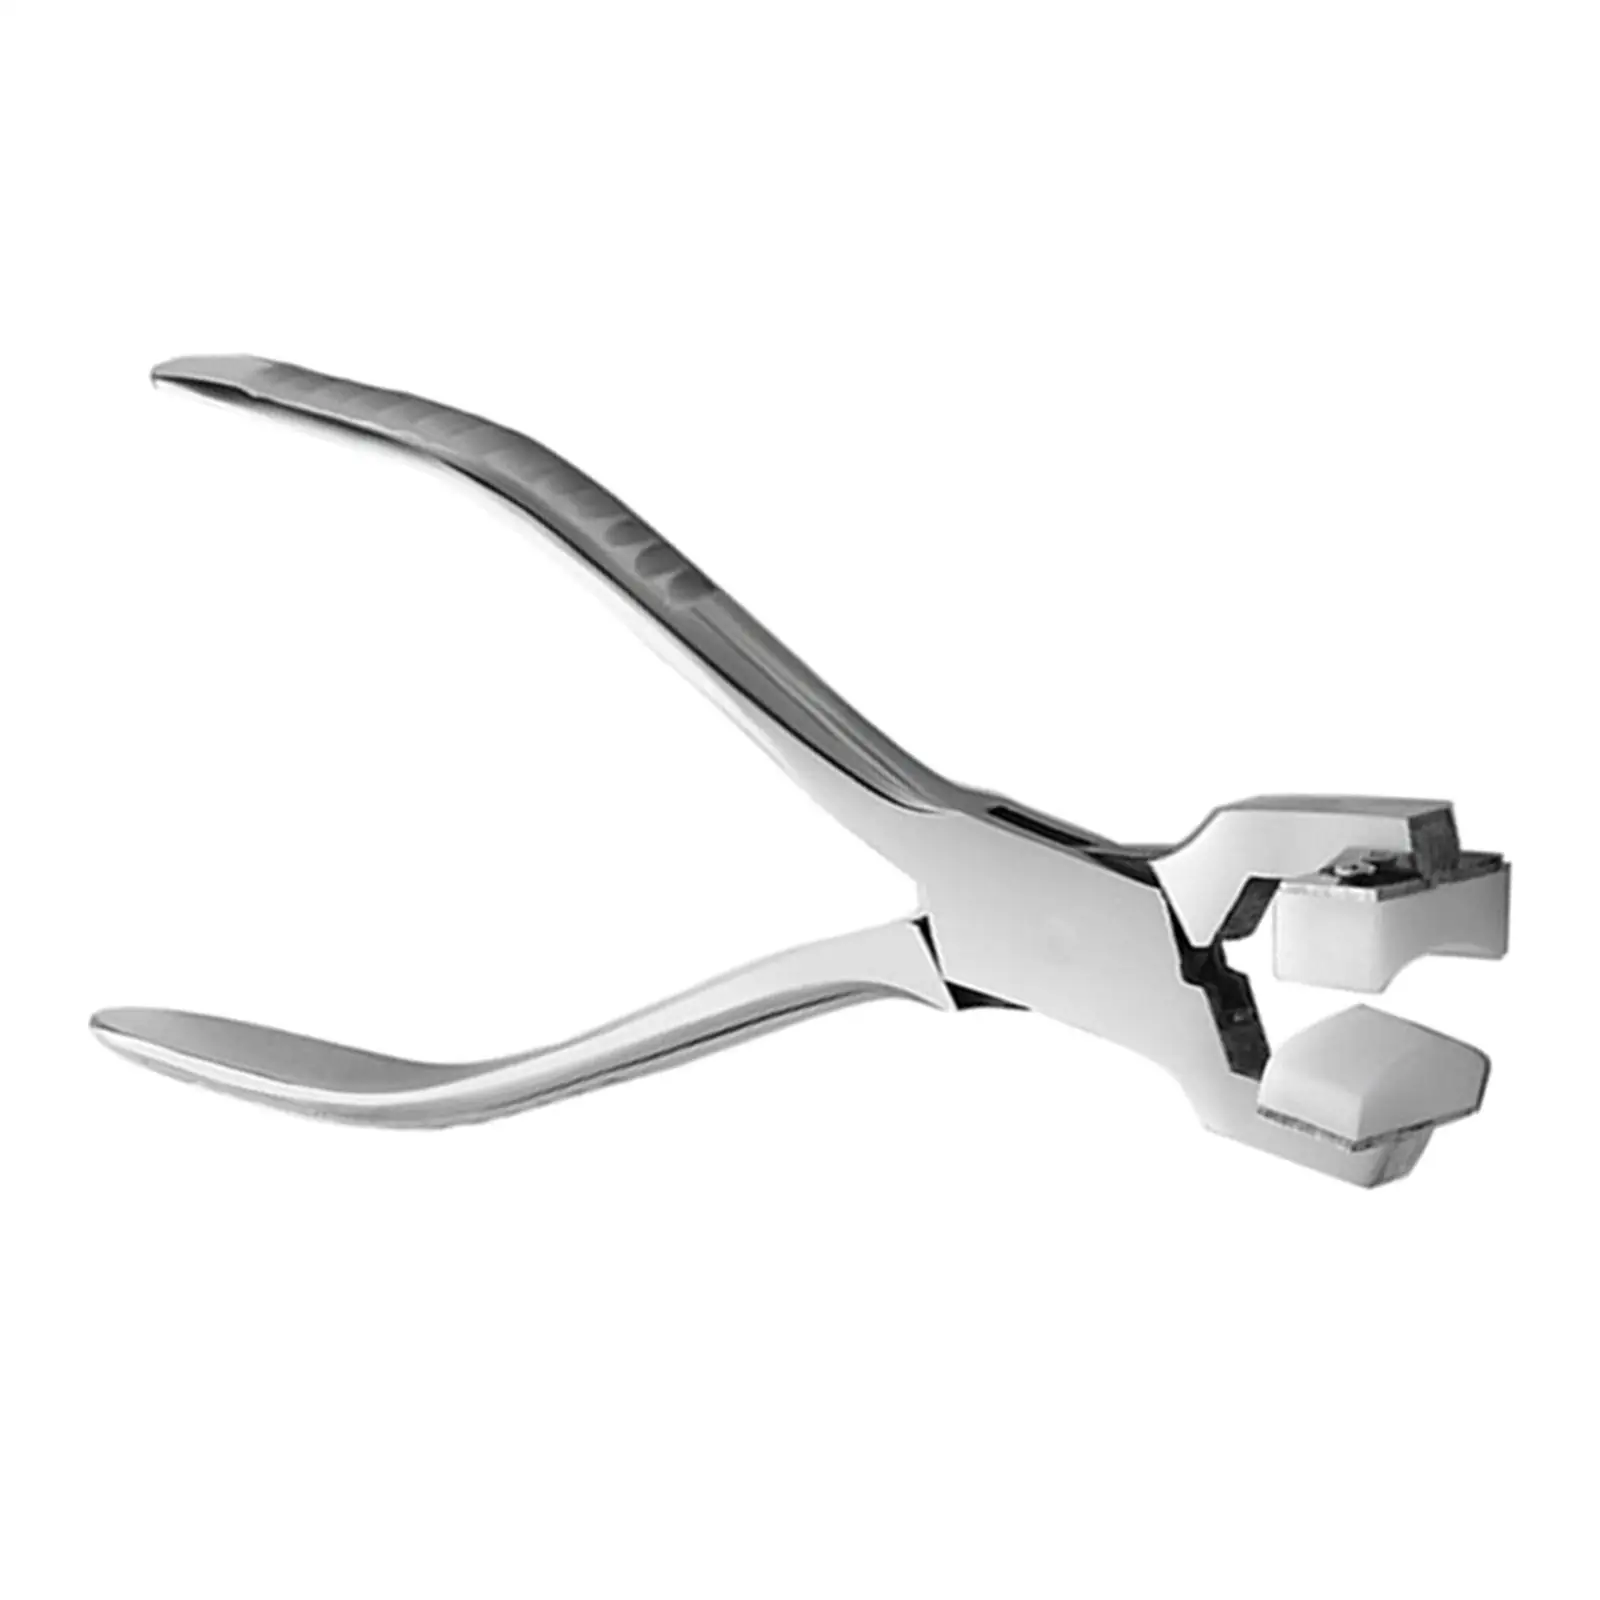 Durable Bracelet Bending Pliers Jewelry Making Ring Curving DIY Professional Stainless Steel Forming Bangle Tool Accessories